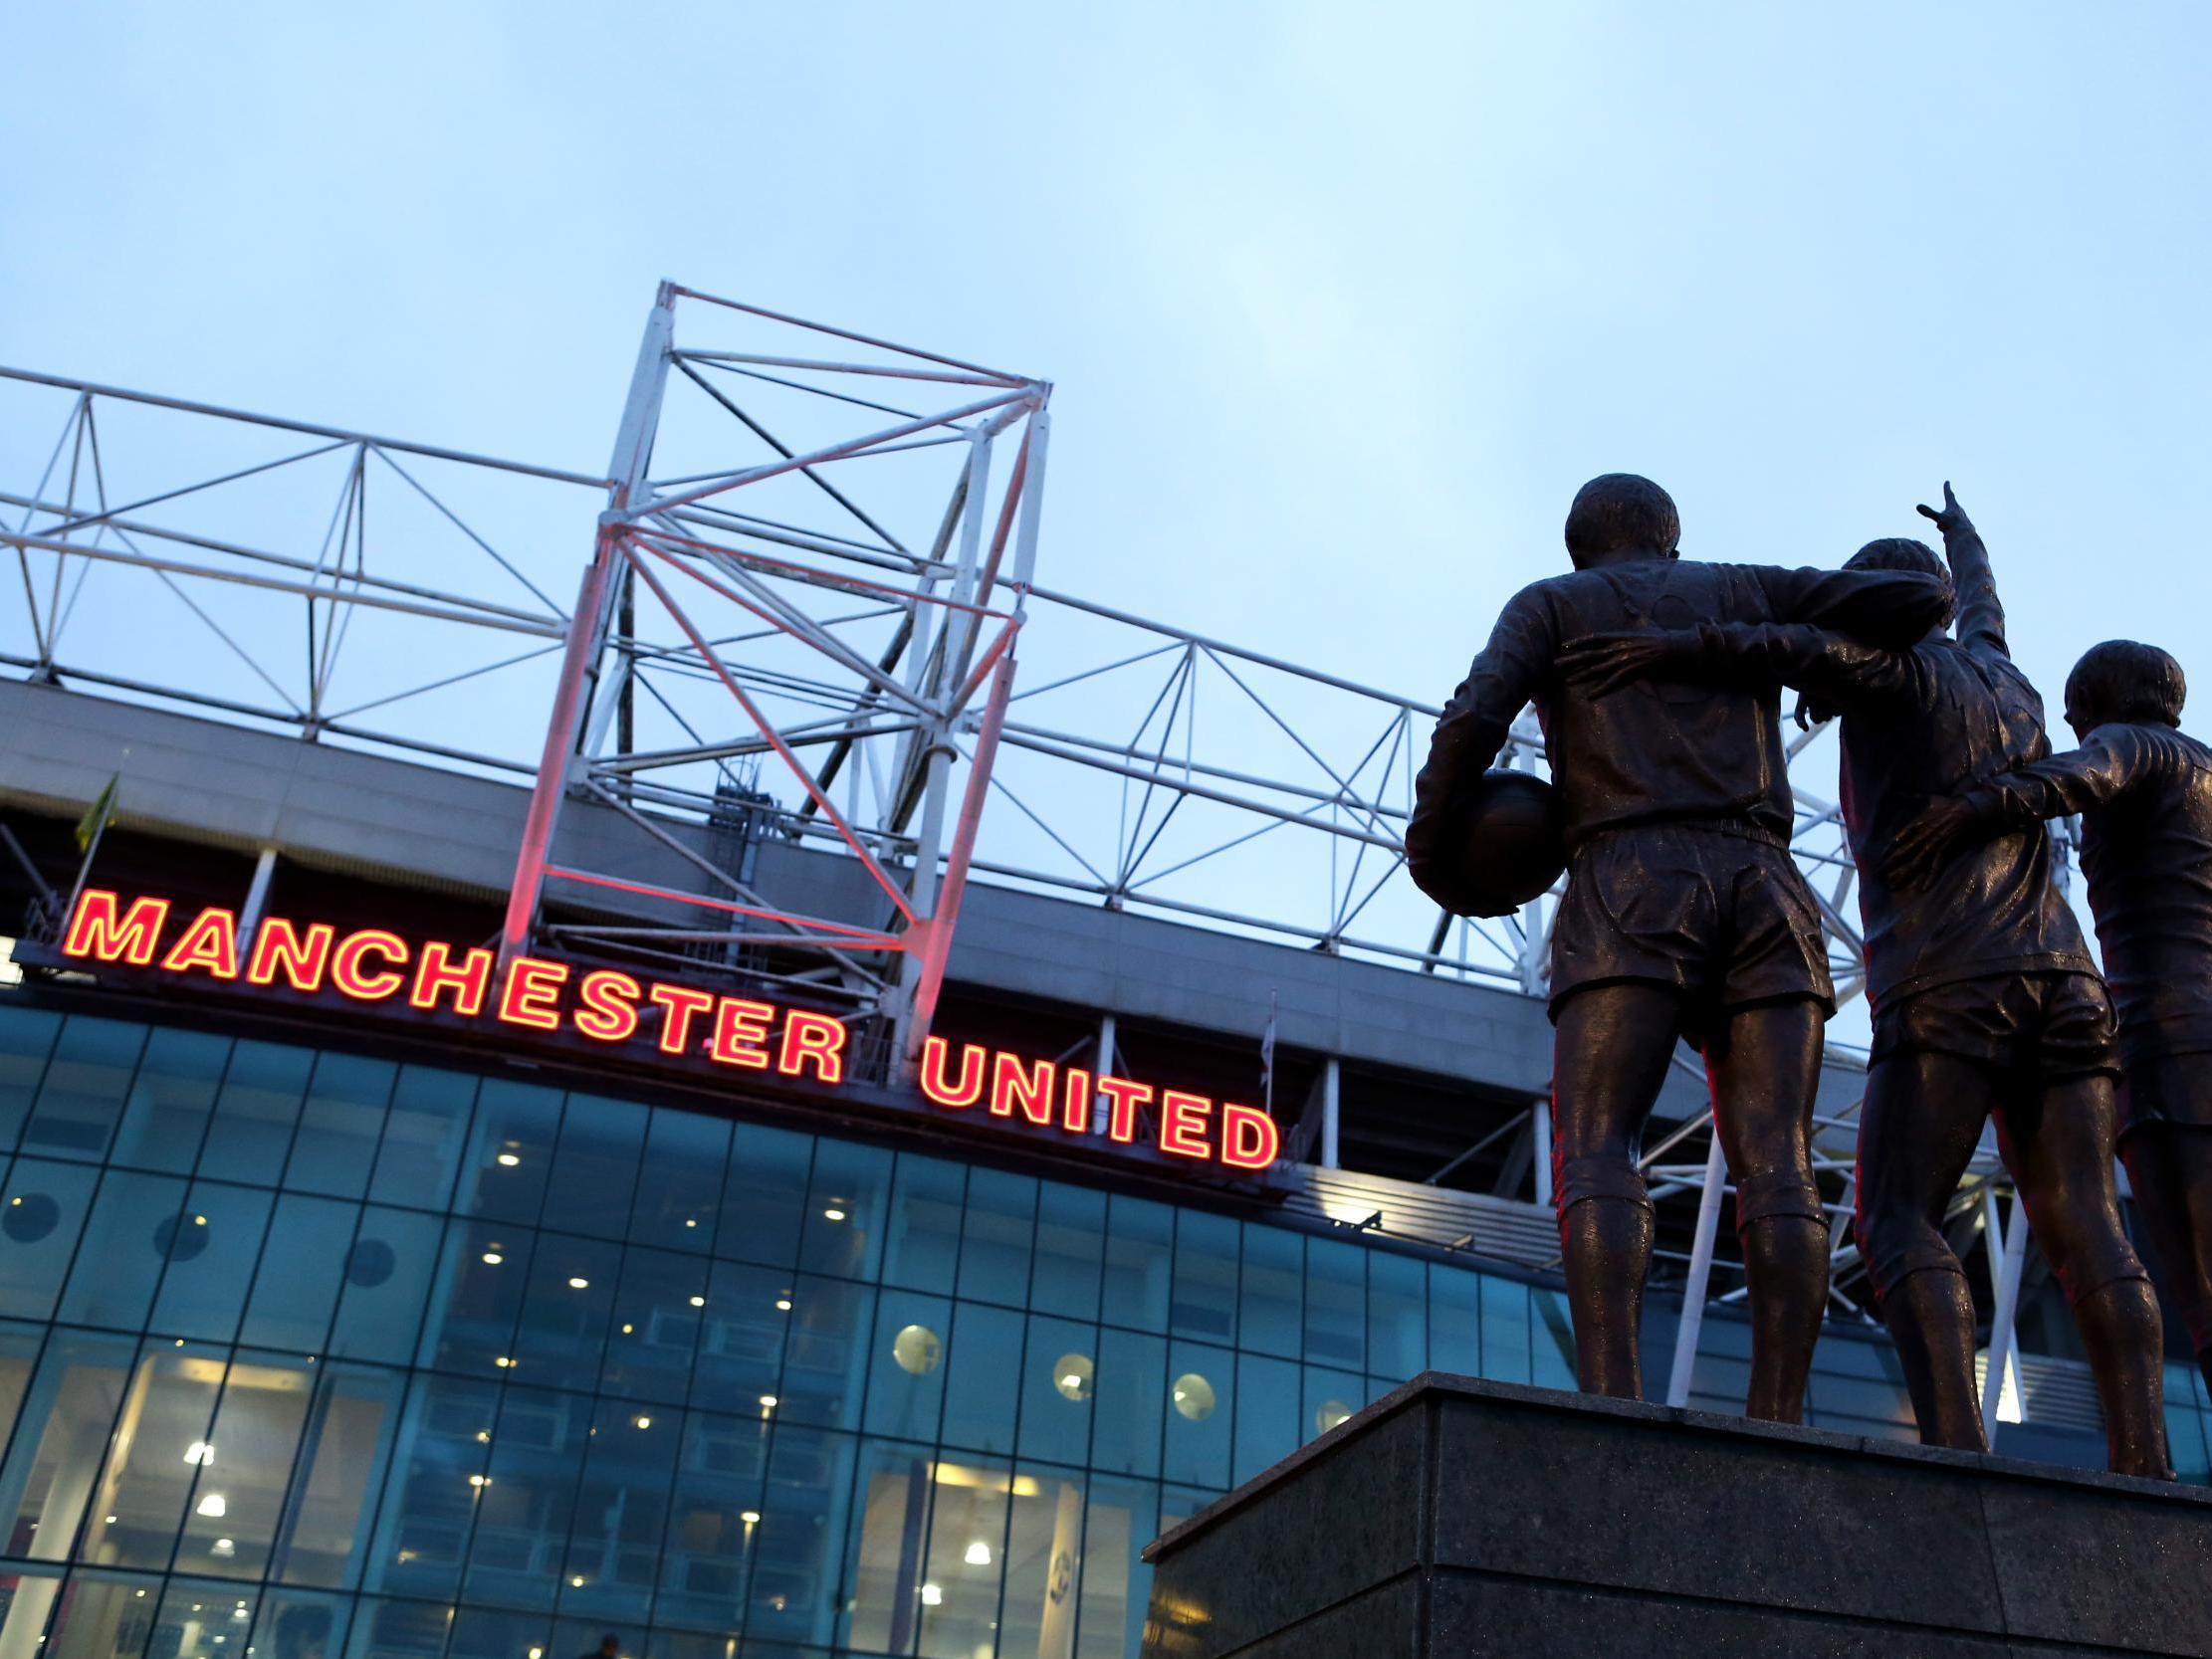 Old Trafford, Manchester United's home ground